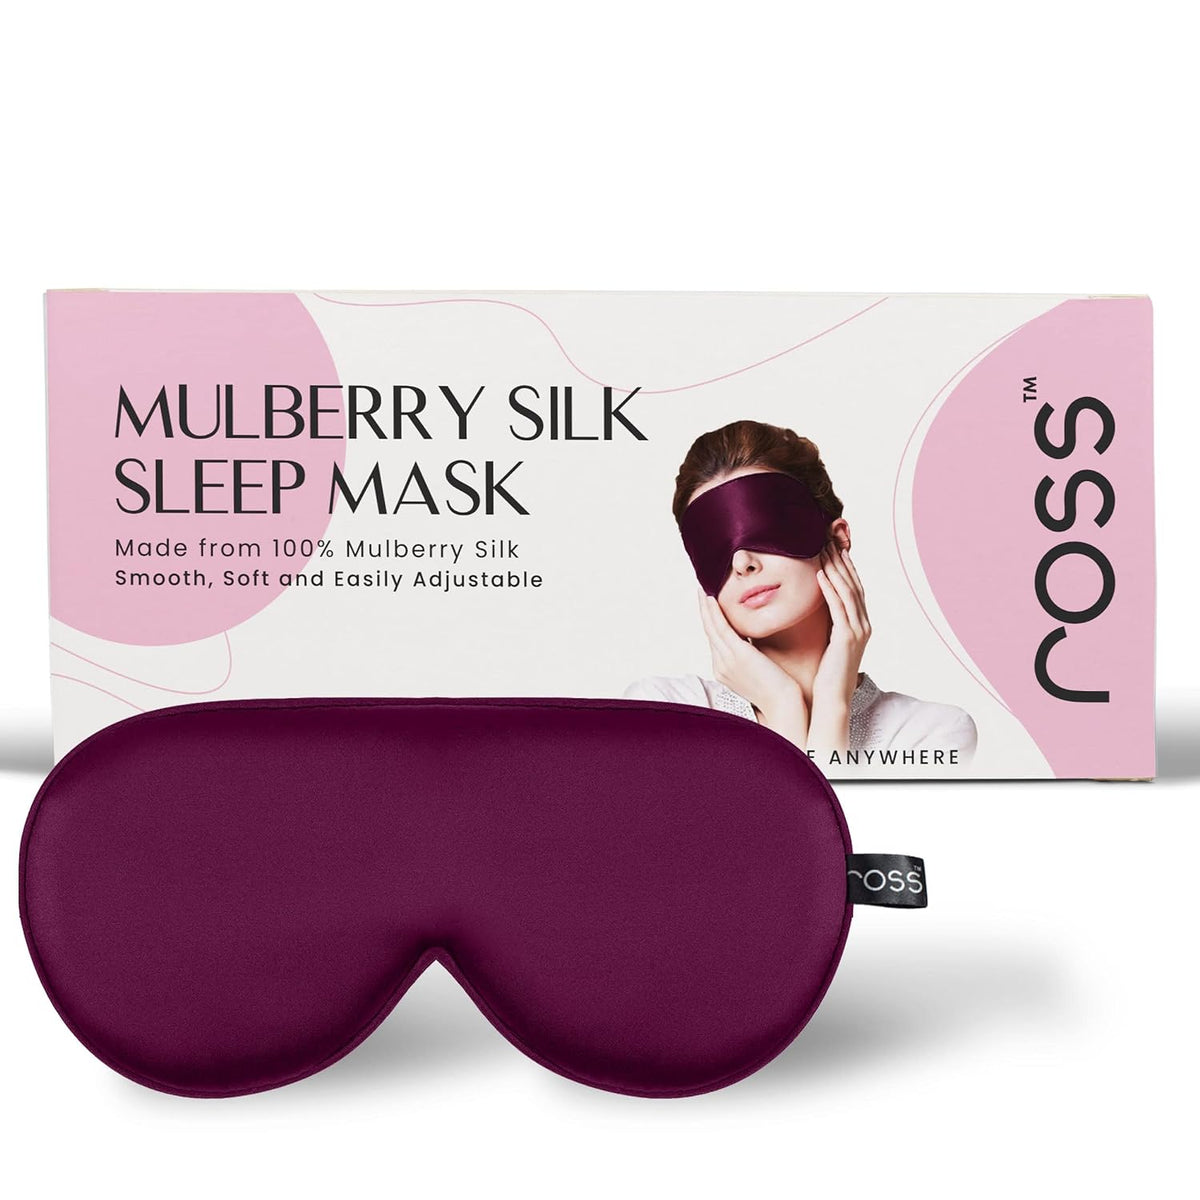 Shop in Sri Lanka for Ross 100% Mulberry Silk Sleep Mask Eye Mask, Super Smooth for Blind Fold (Maroon) - Back to results from Ross - Shop at Selekt